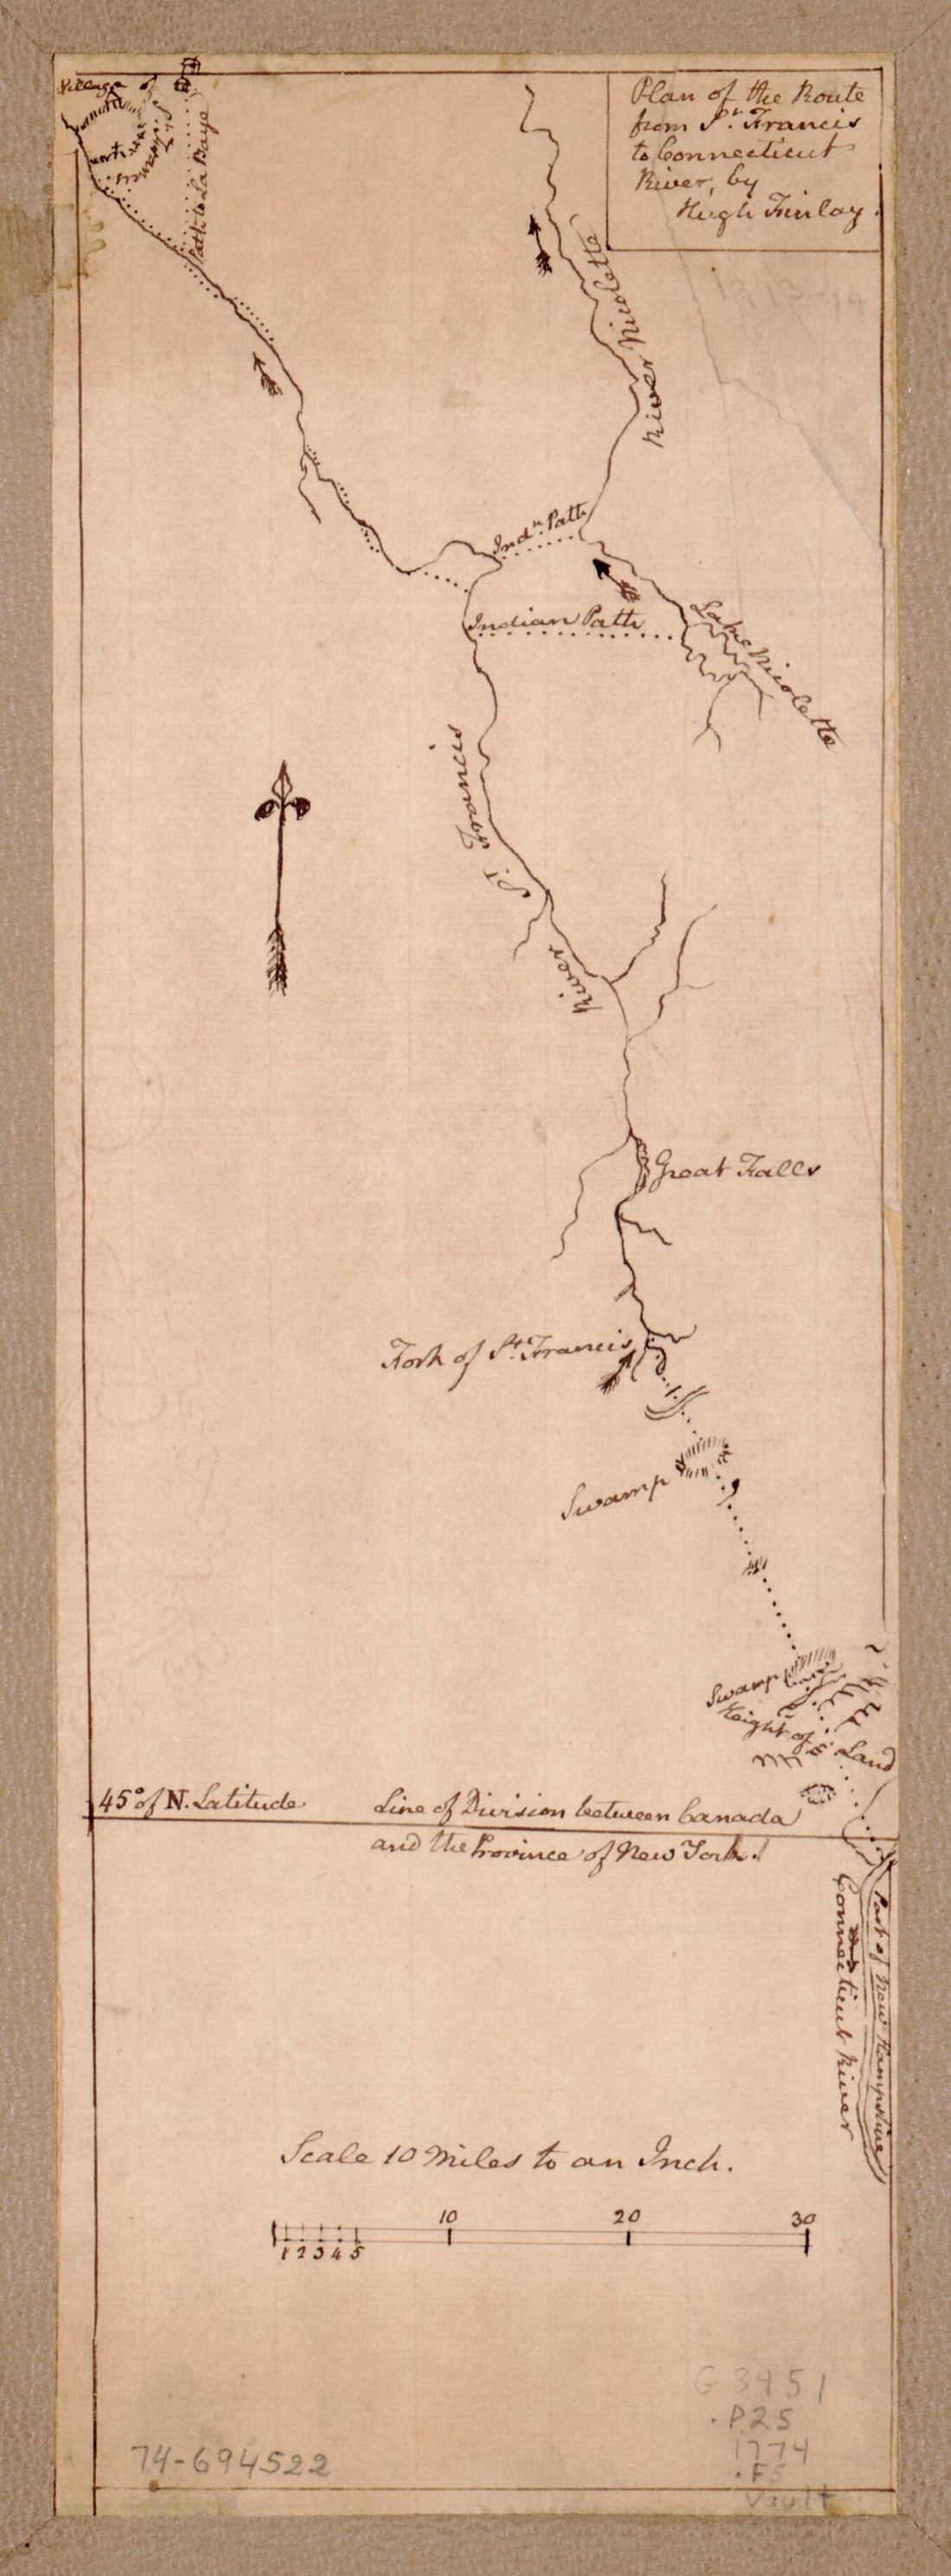 This old map of Plan of the Route from St. Francis to Connecticut River from 1774 was created by Hugh Finlay in 1774